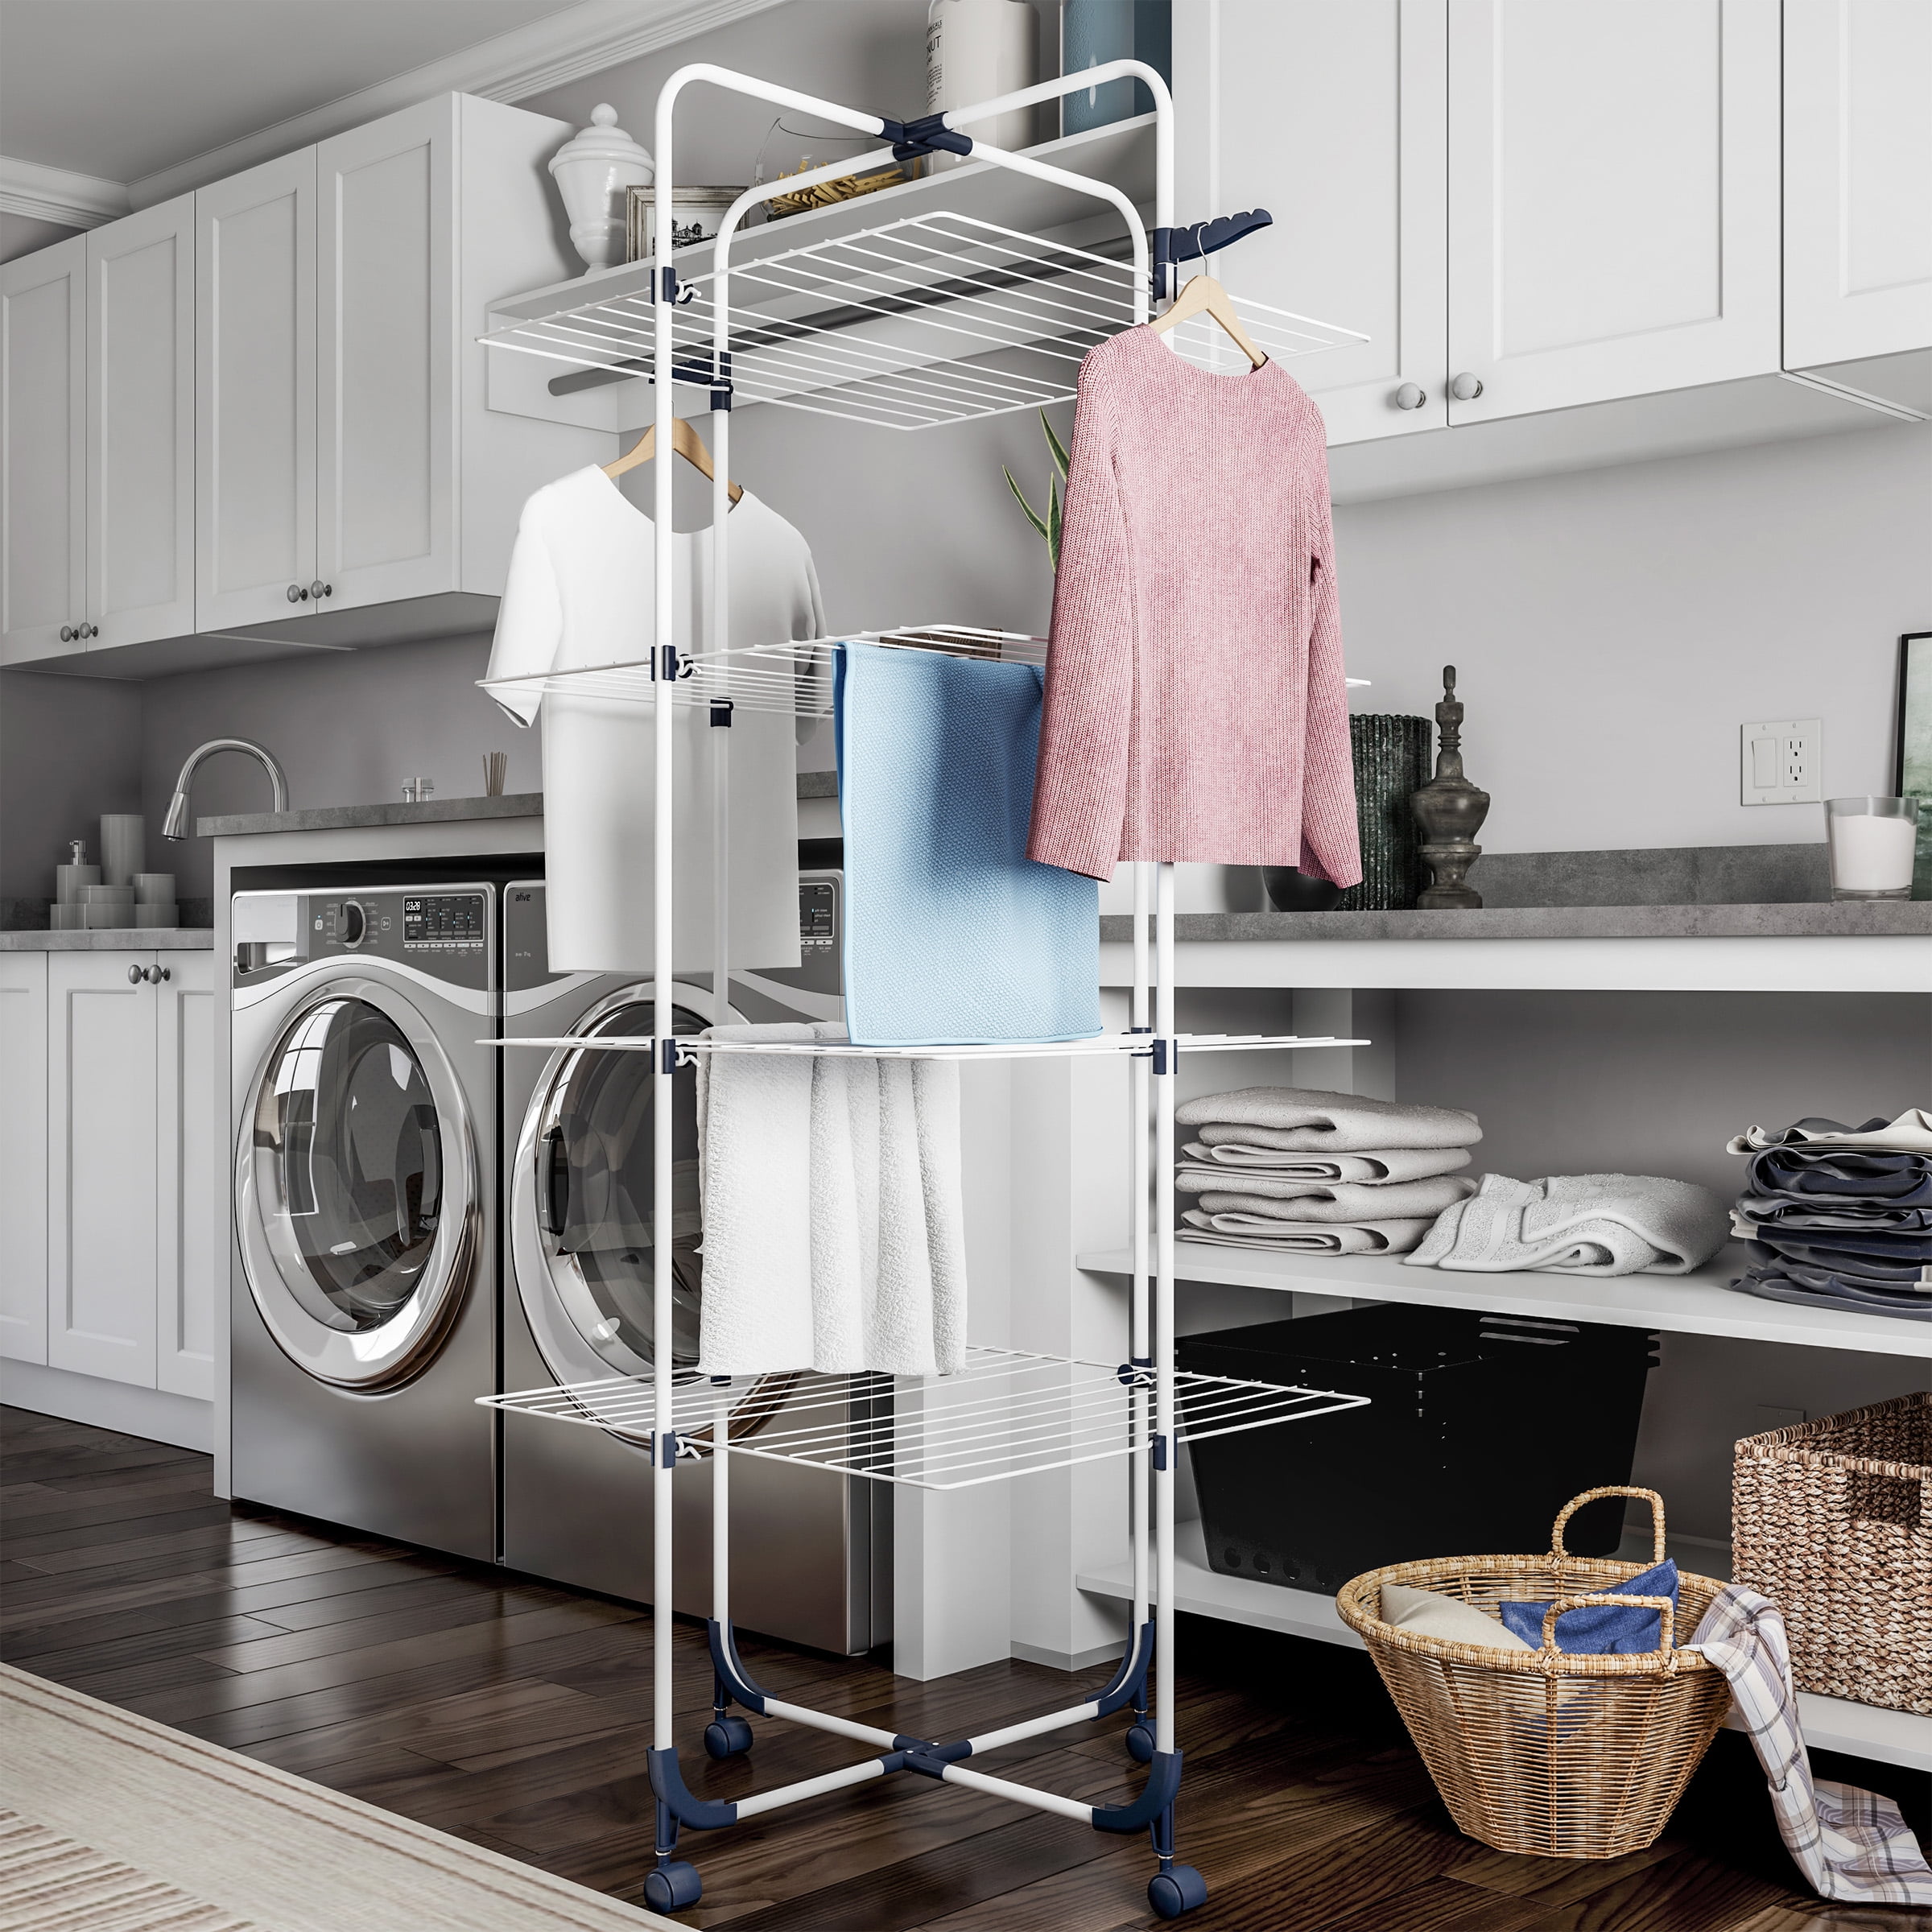 White Small Wall Mounted Clothes Drying Rack For Laundry Room 14" x22" 